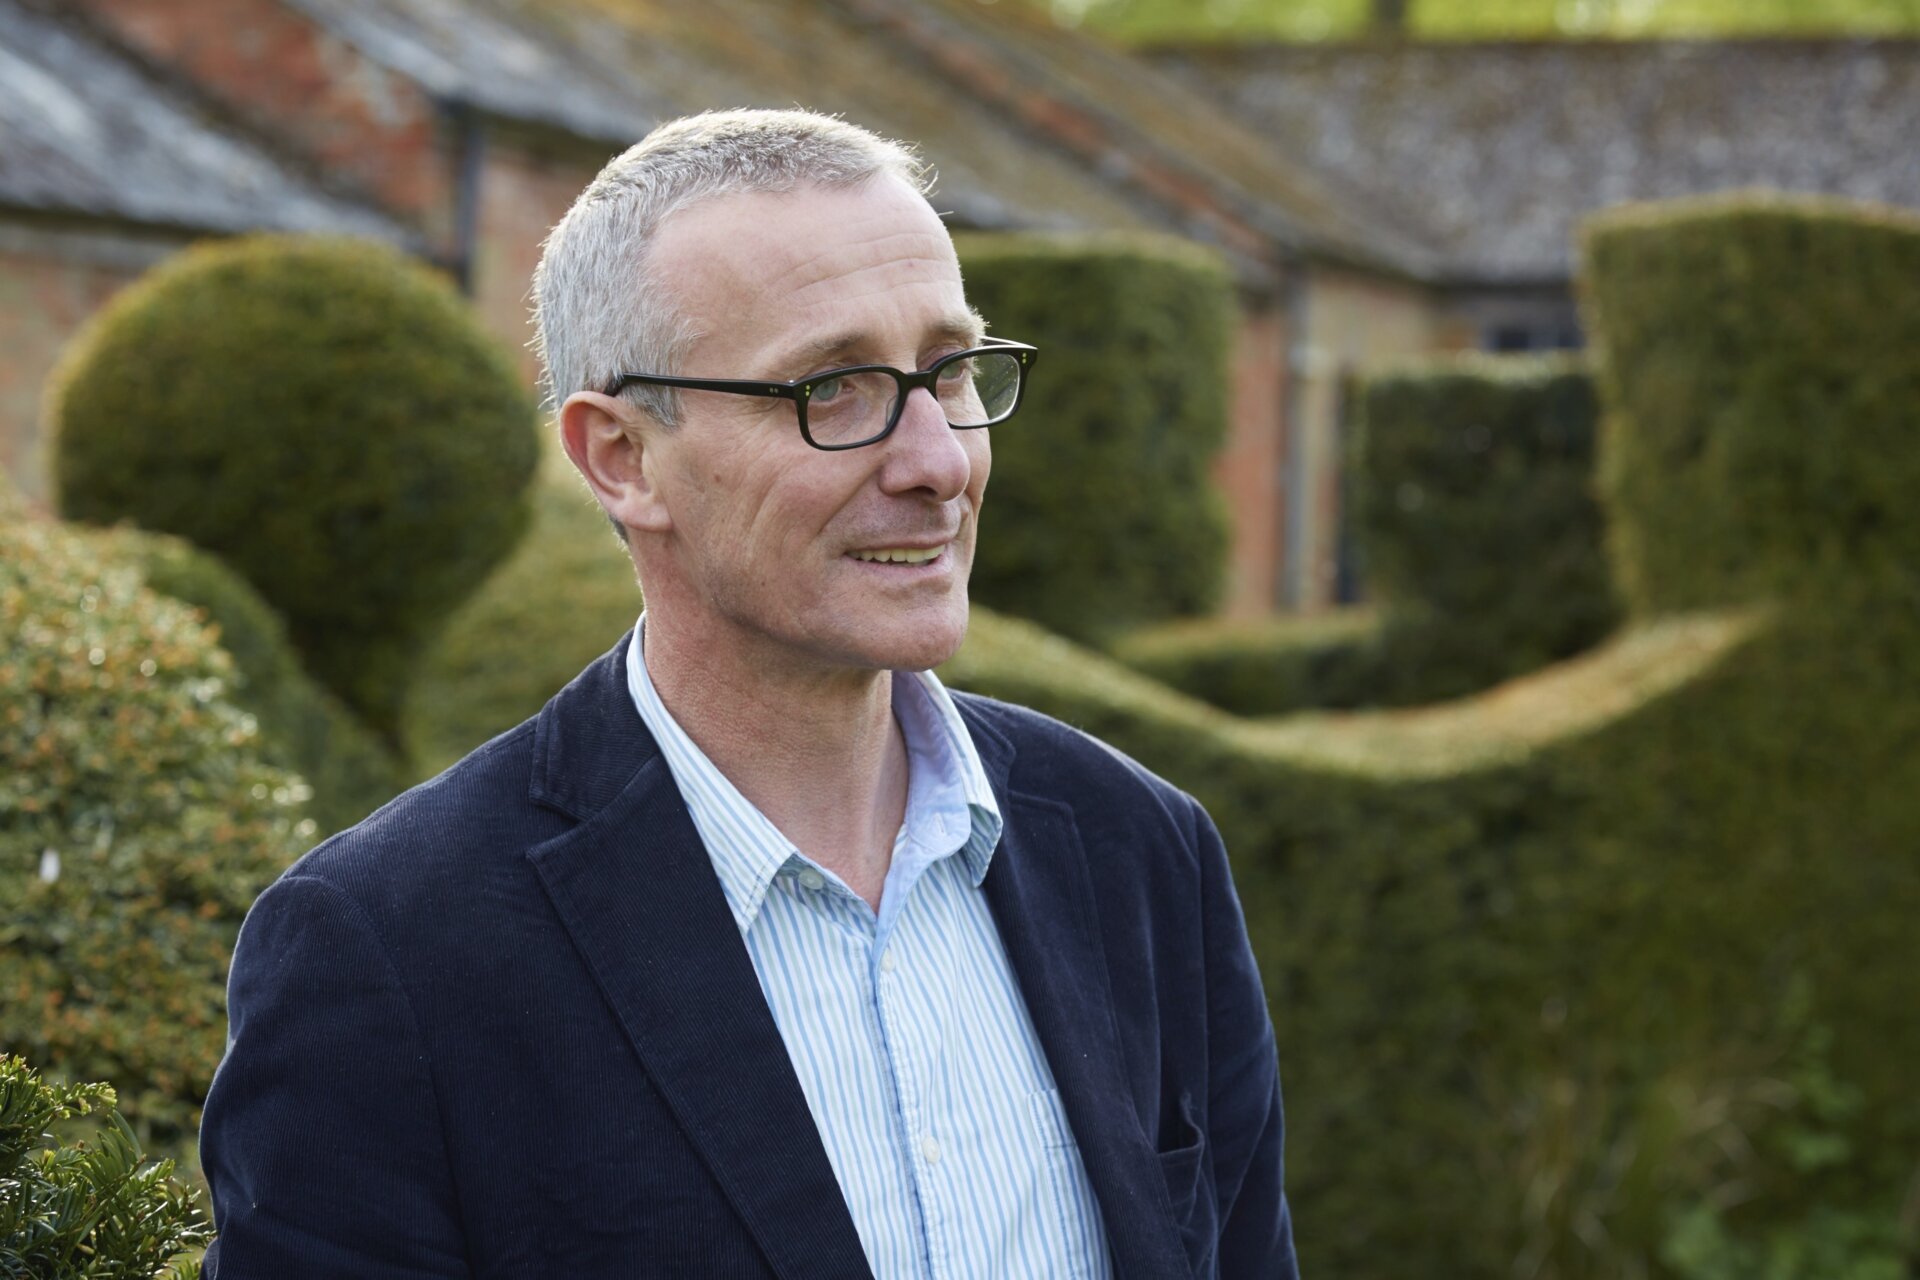 James Alexander Sinclair, RHS Chelsea Flower Show and British garden designer appears at the Carlow Garden Festival in 2023